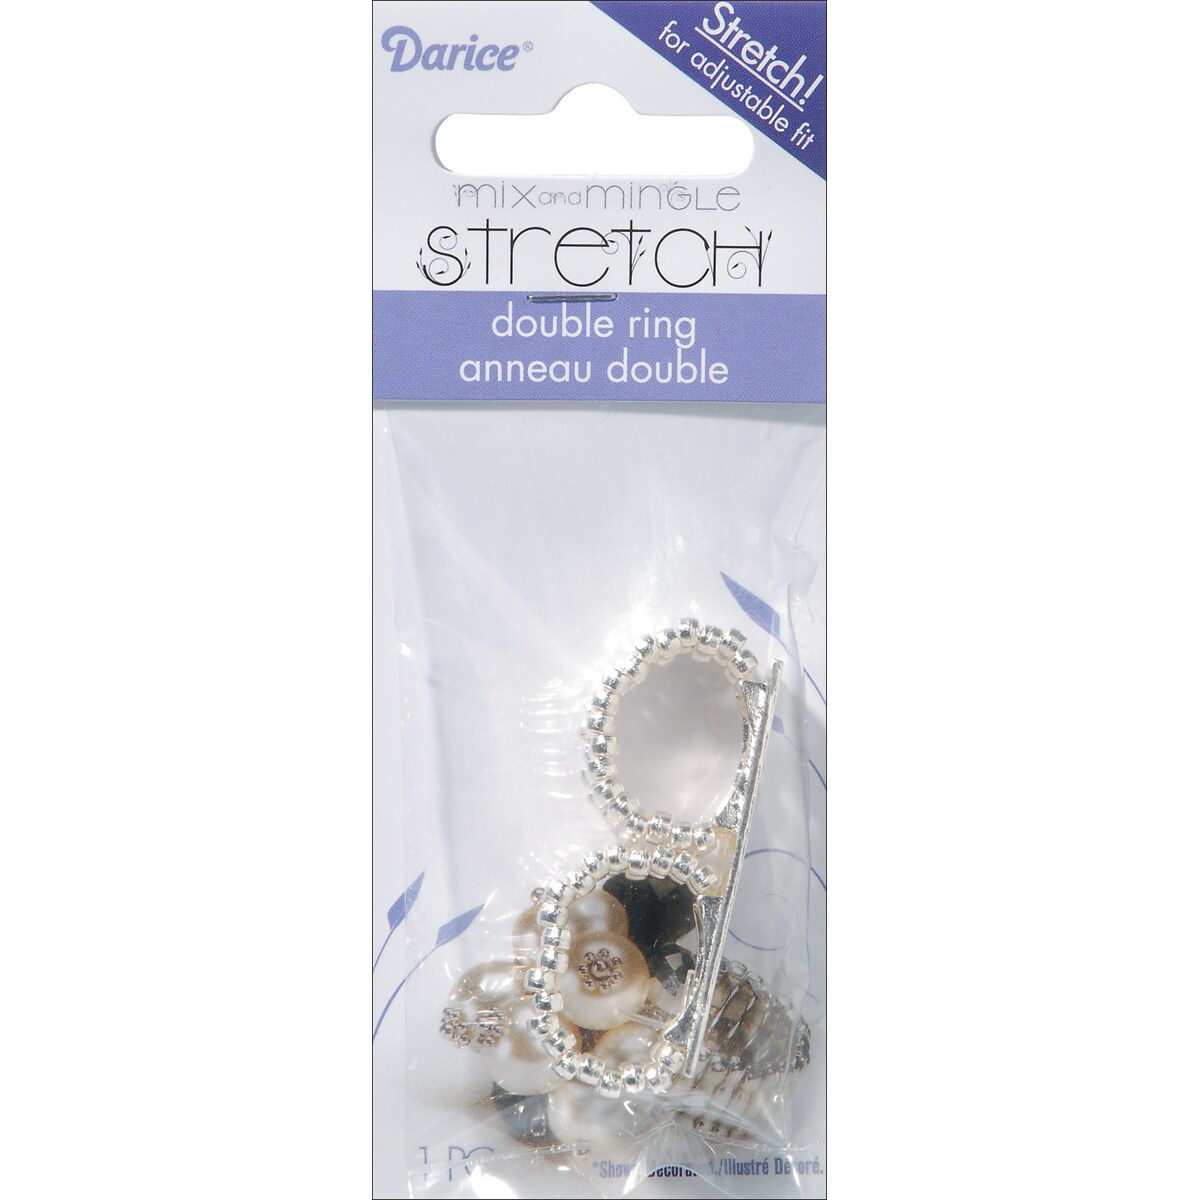 Darice Jewelry and Beading   Loose Beads and Jewelry 